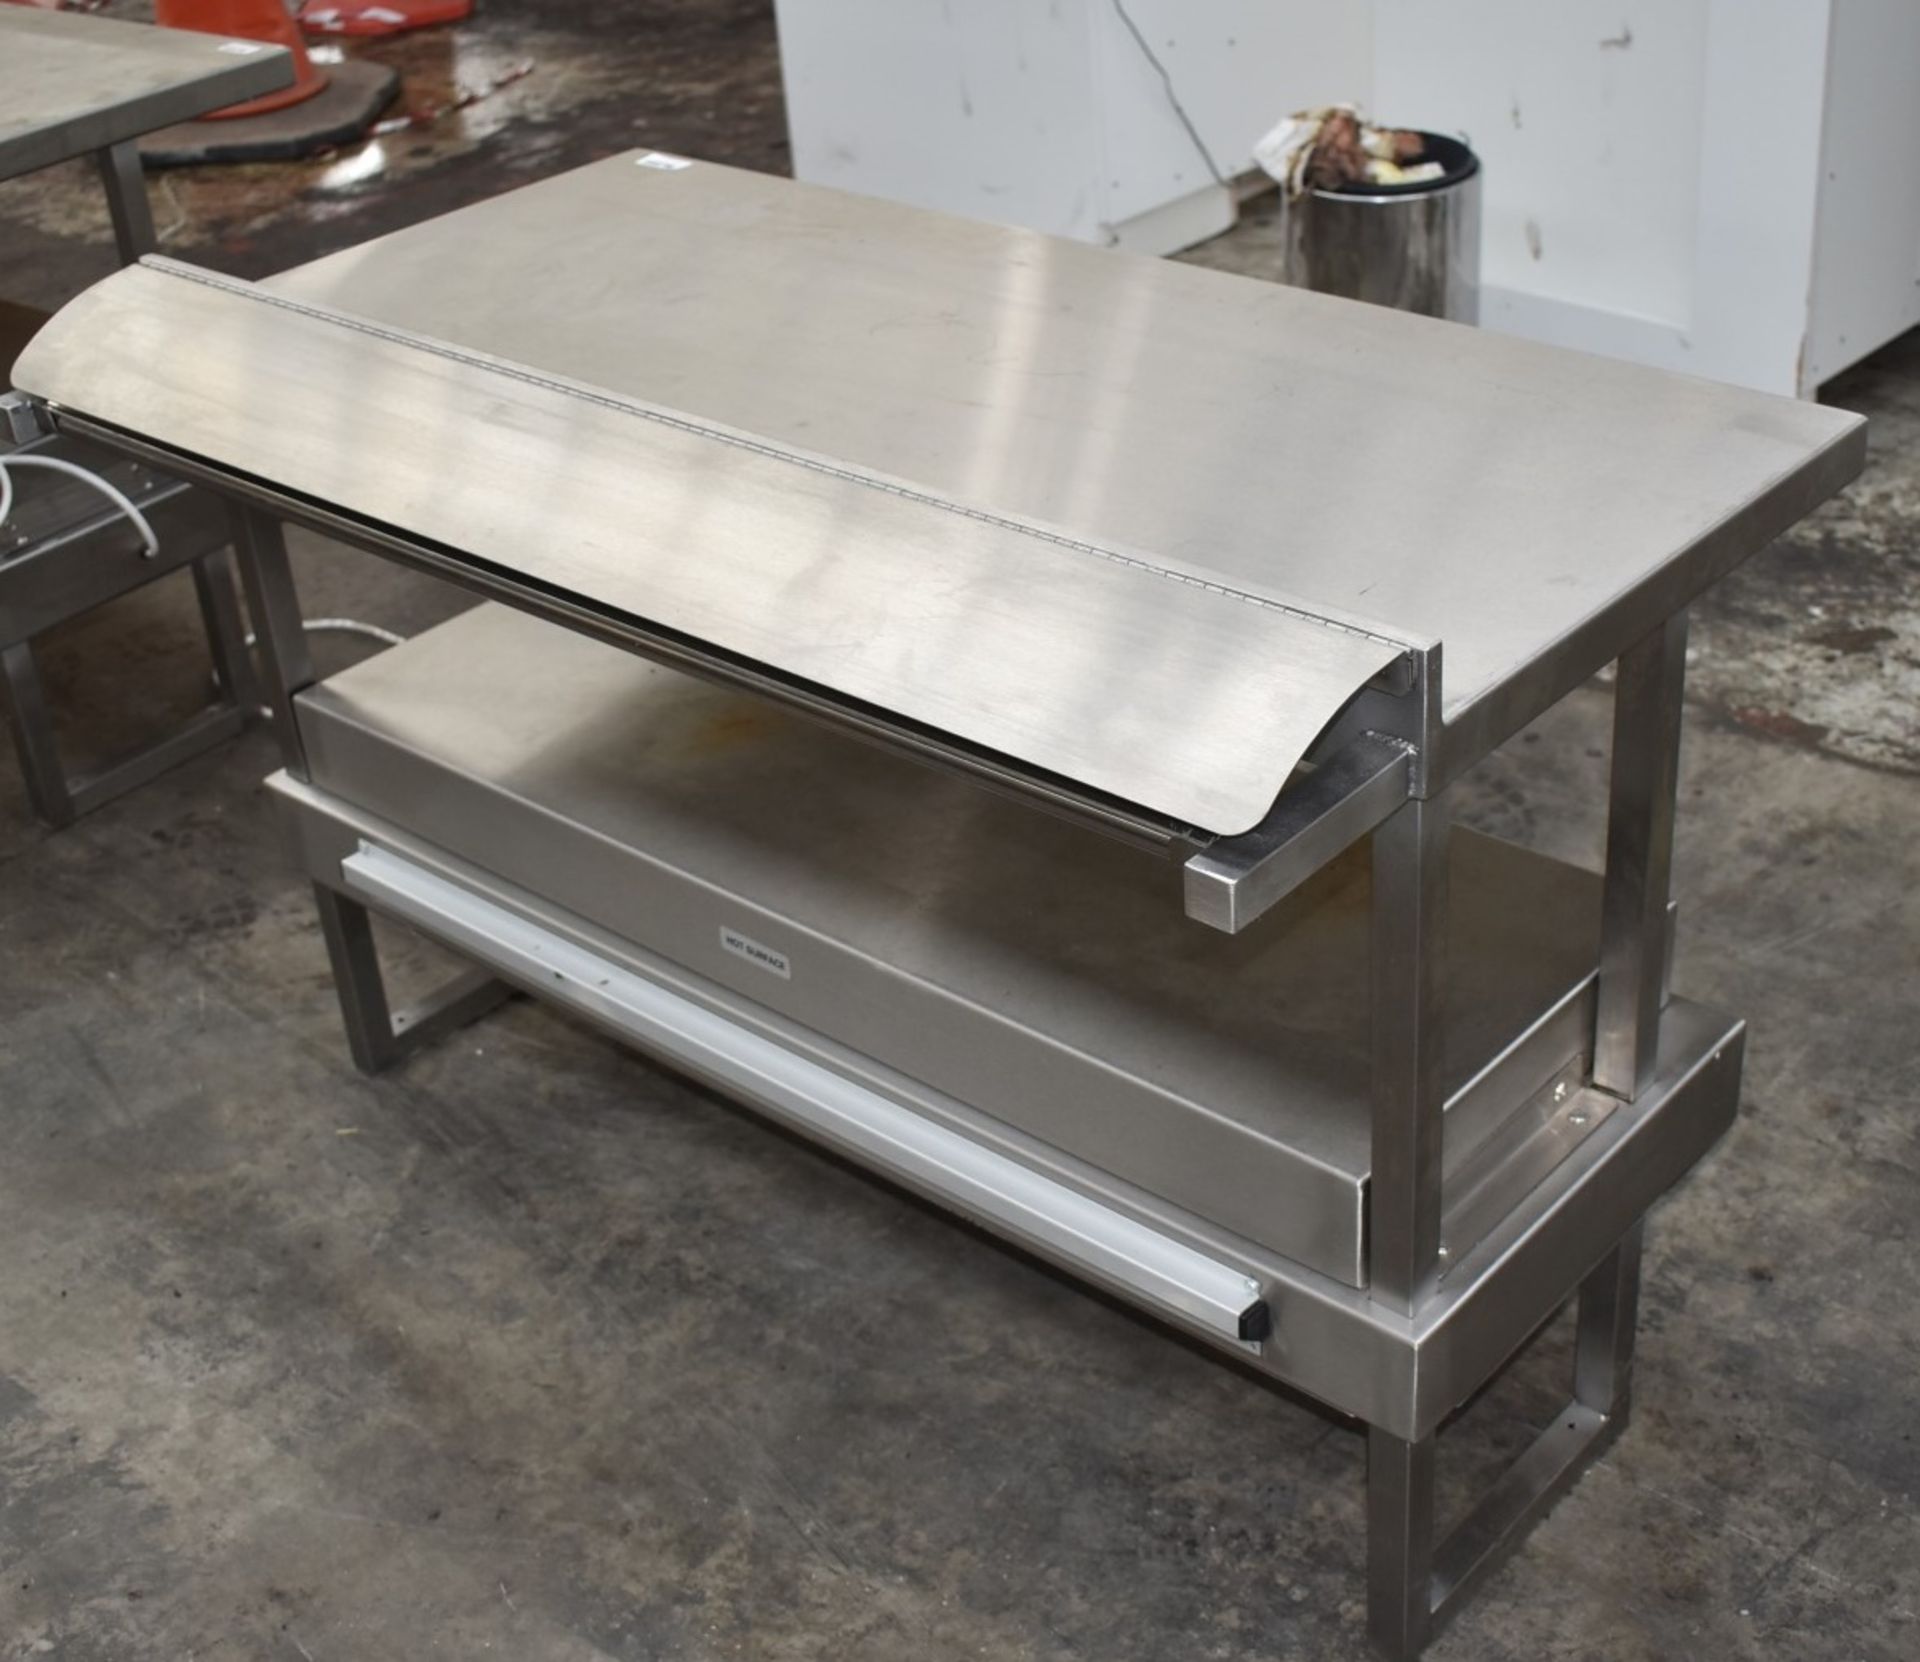 1 x Stainless Steel Bench Mounted Passthrough Food Warmer With Ticket Rails Ref SL254 WH4 - - Image 4 of 5